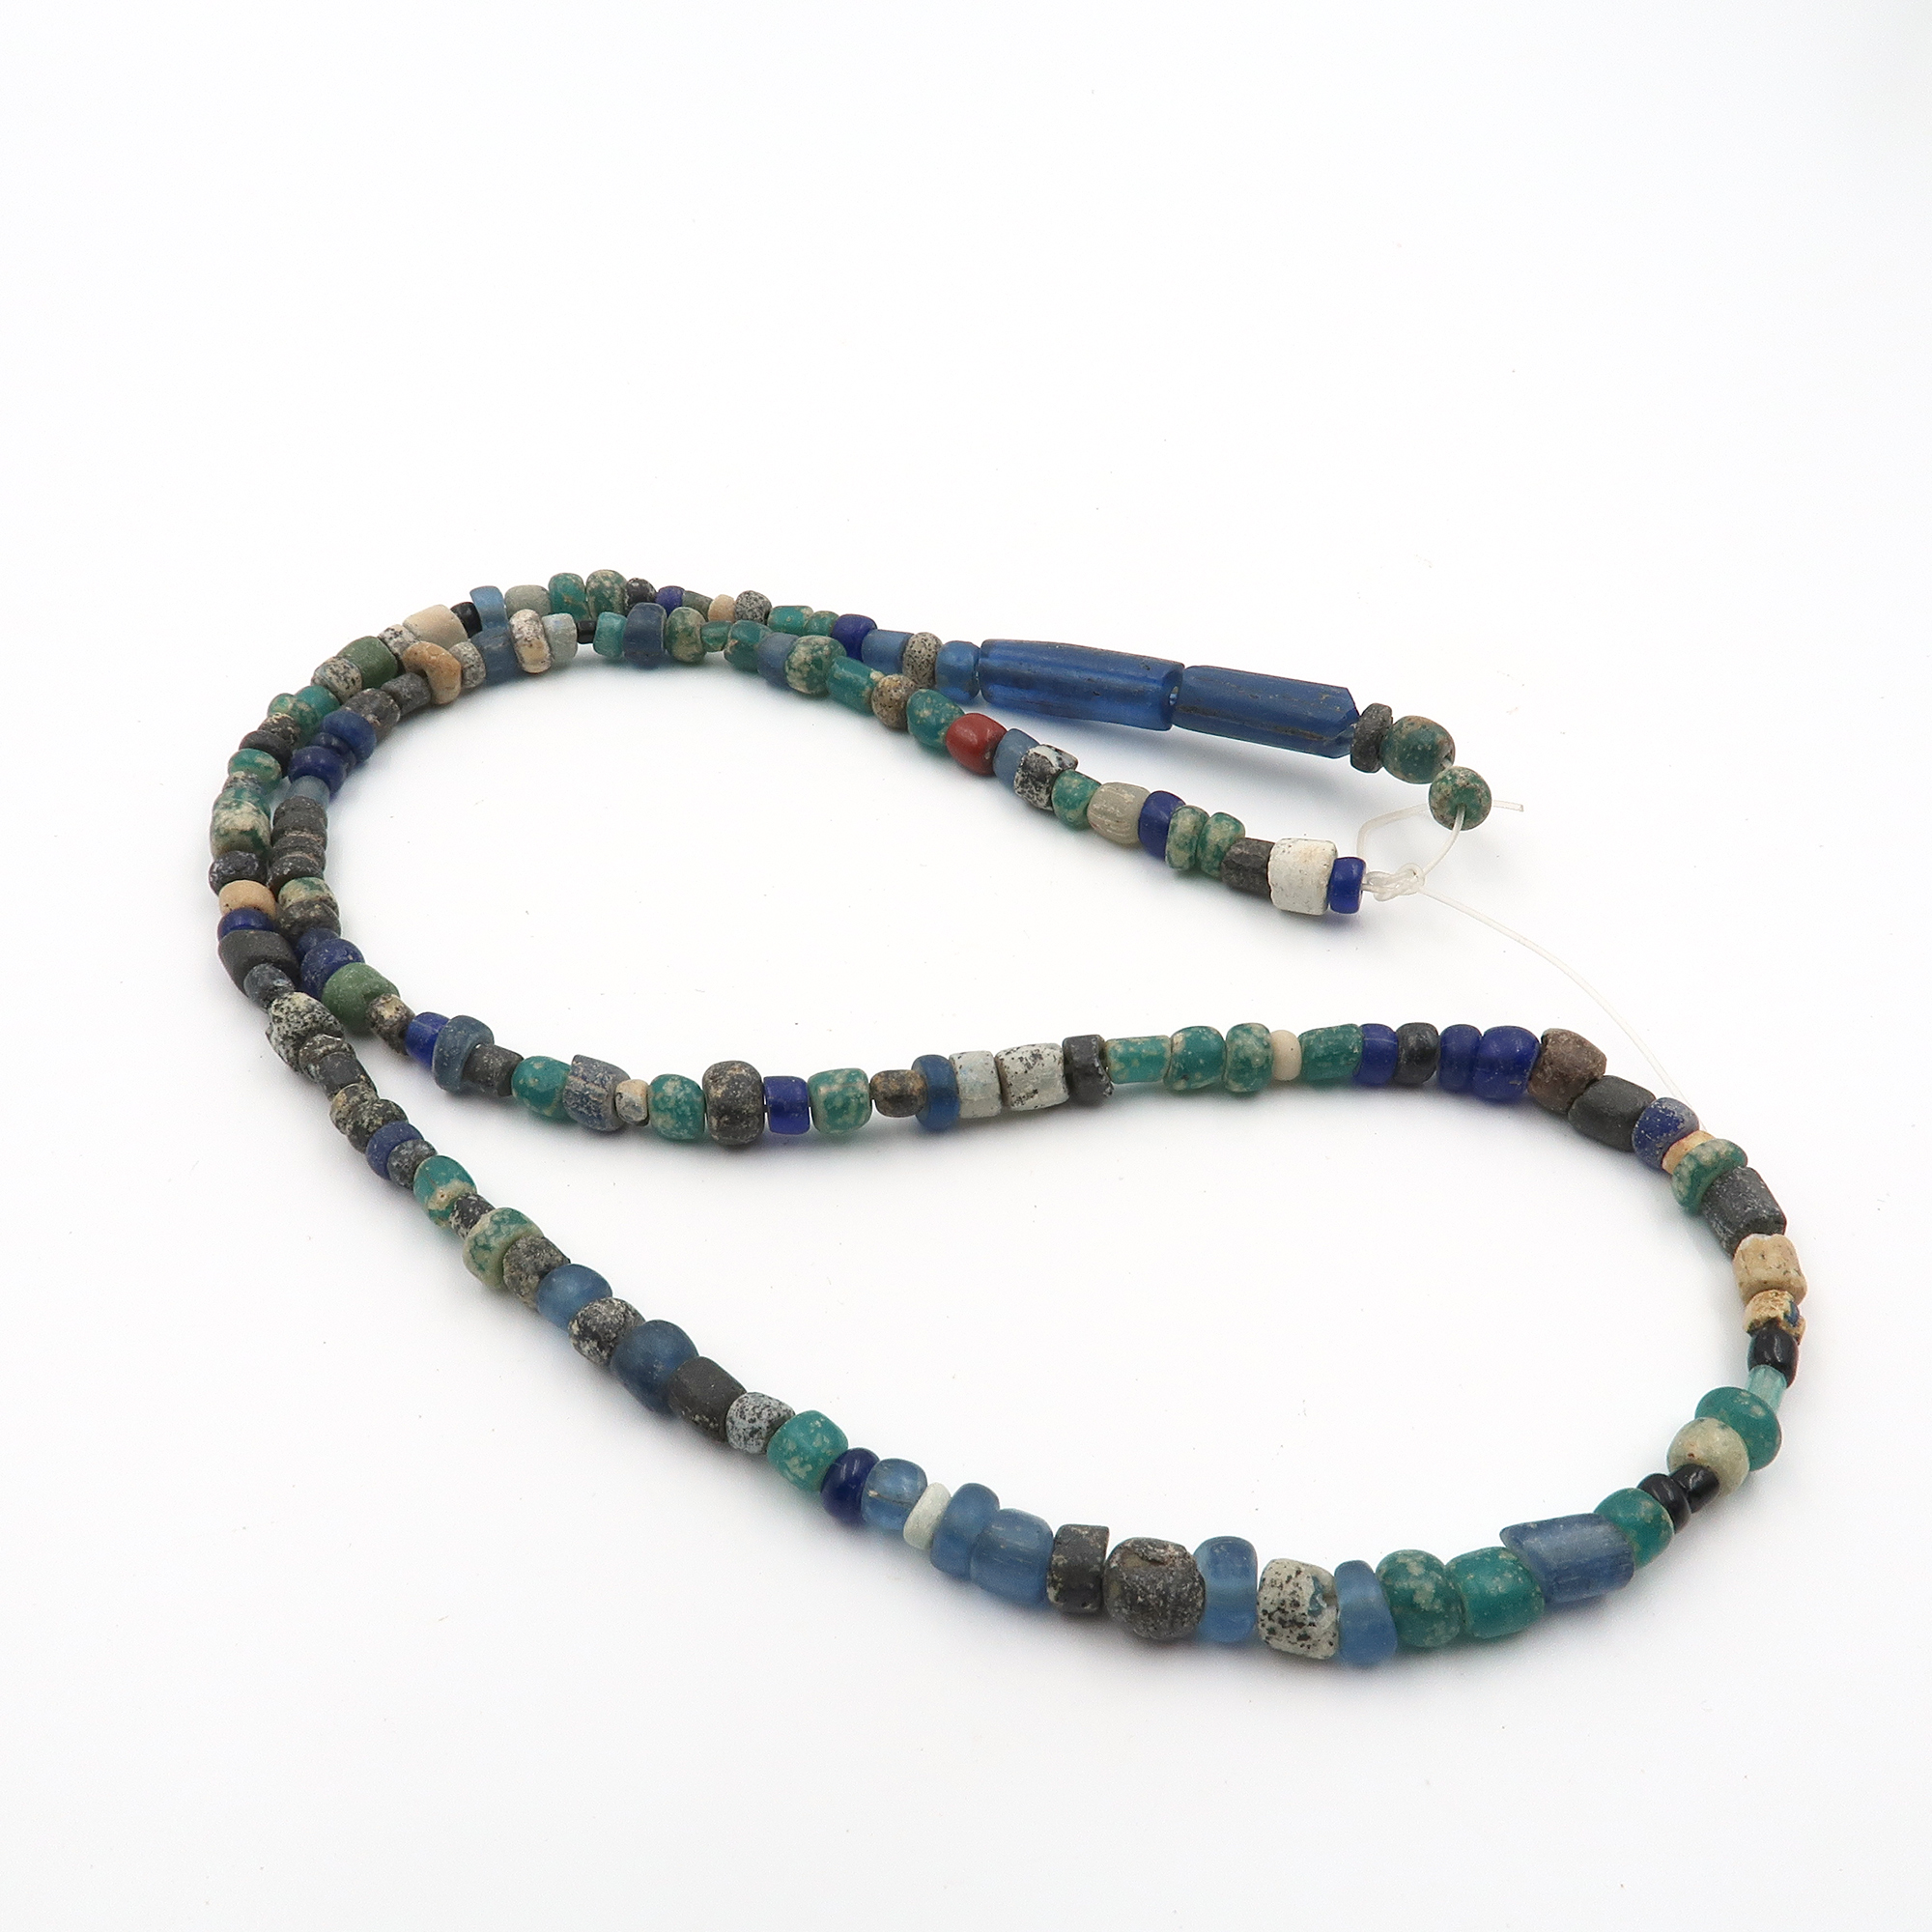 Thebeadchest Blue Ancient Djenne Nila Glass Beads 8mm Ghana African Disk 24-26 inch Strand Handmade, Adult Unisex, Size: One Size